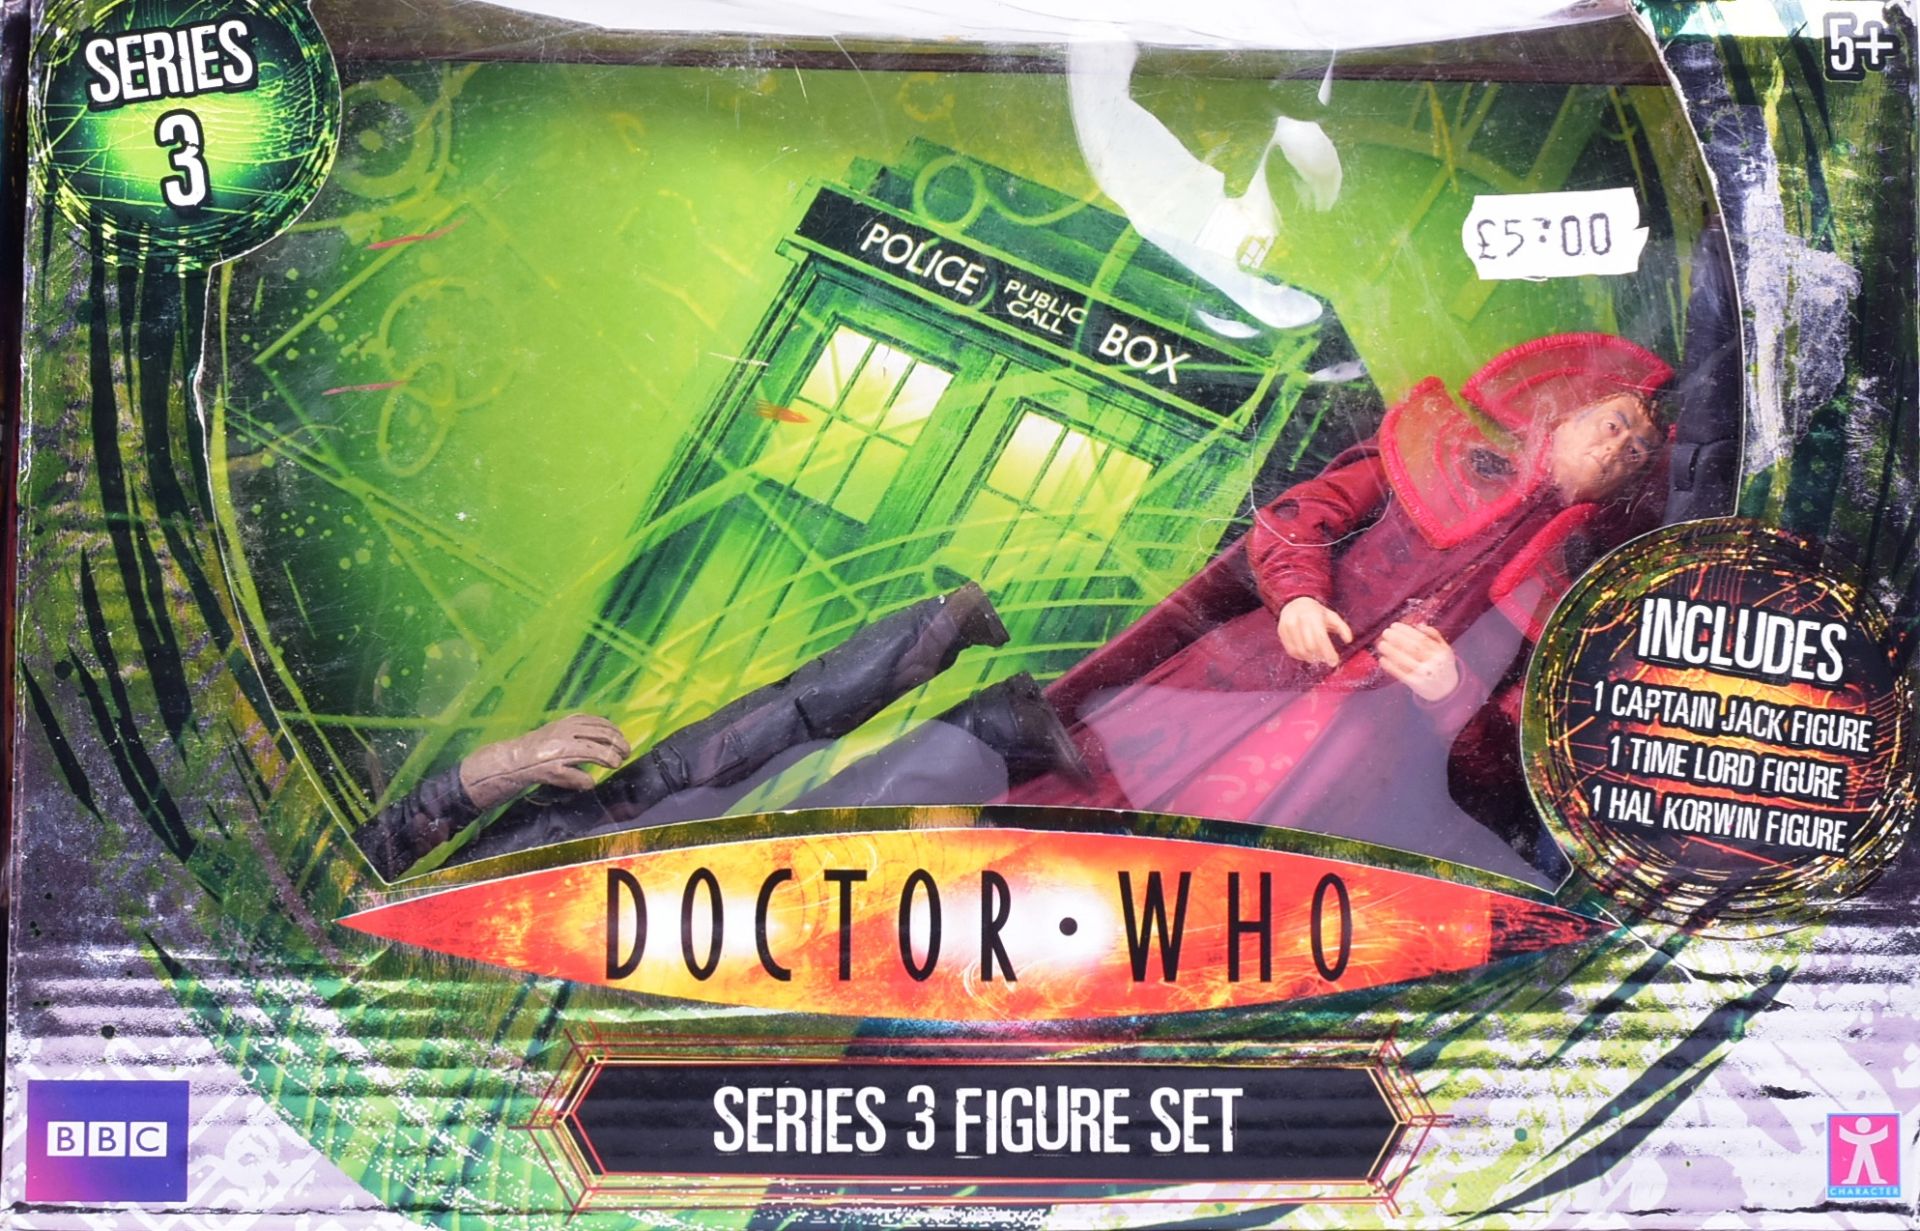 DOCTOR WHO - CHARACTER OPTIONS - 'SERIES' FIGURE SETS - Image 4 of 4